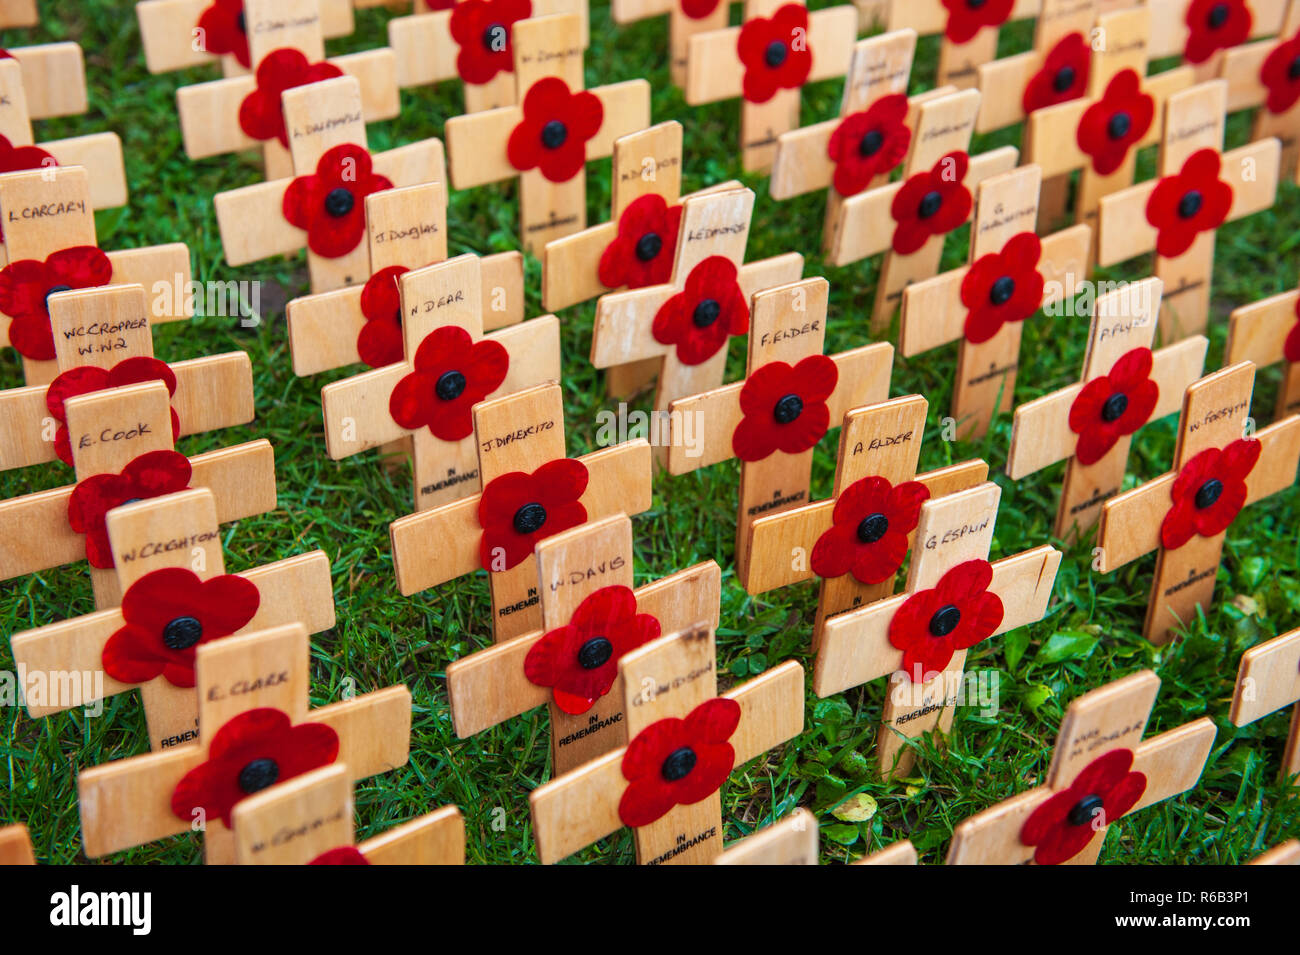 Wooden crosses with poppies attached with names of the fallen. Stock Photo